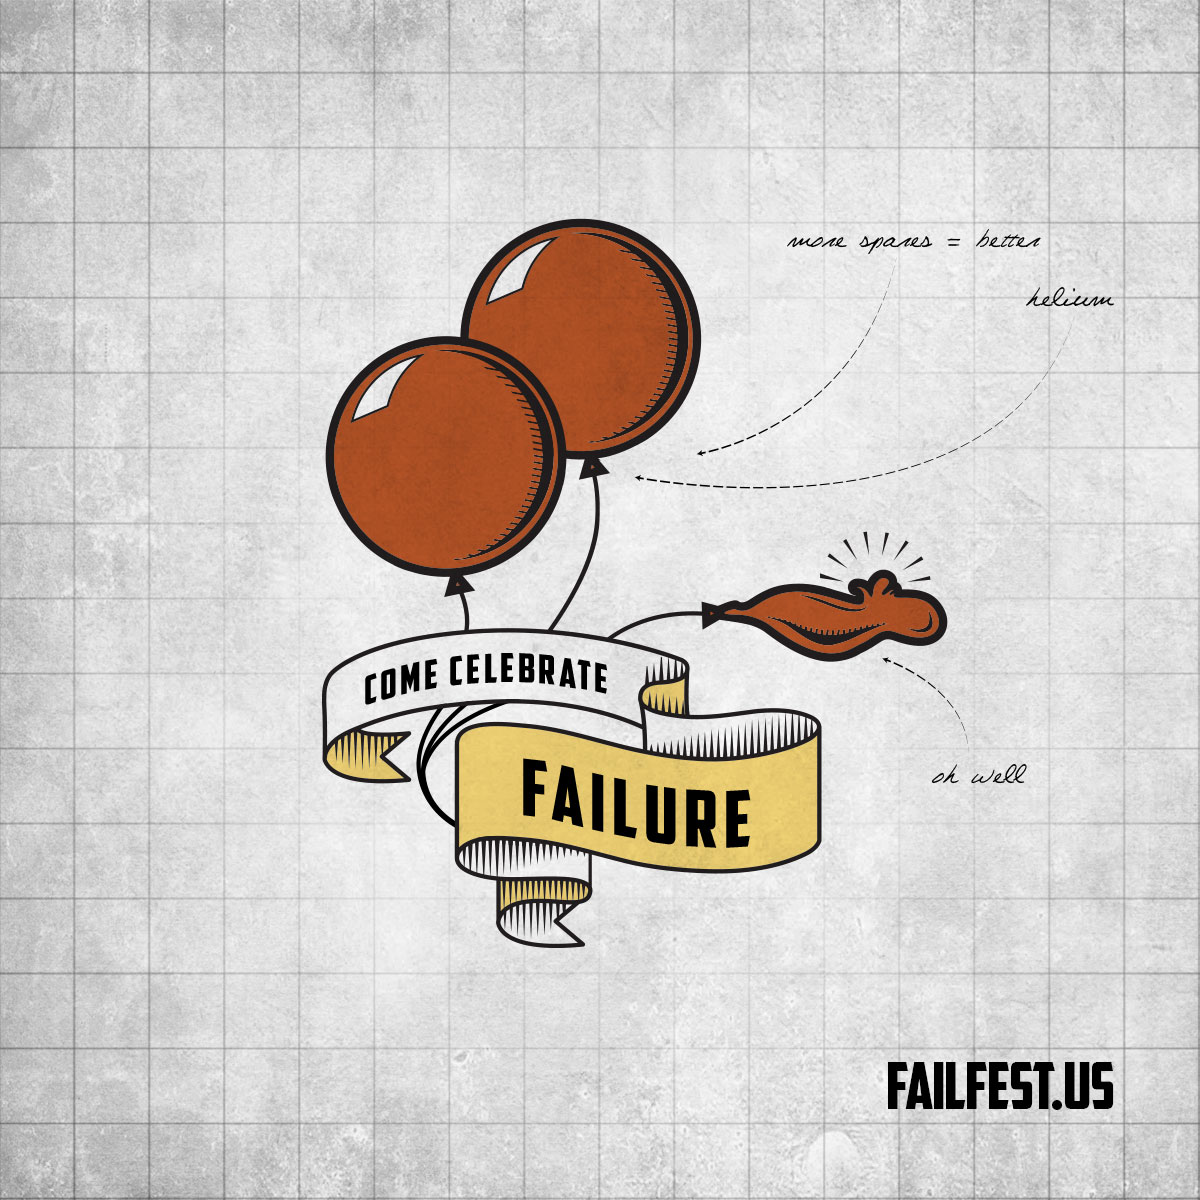 Celebrate failure by finding a Fail Fest event near you!